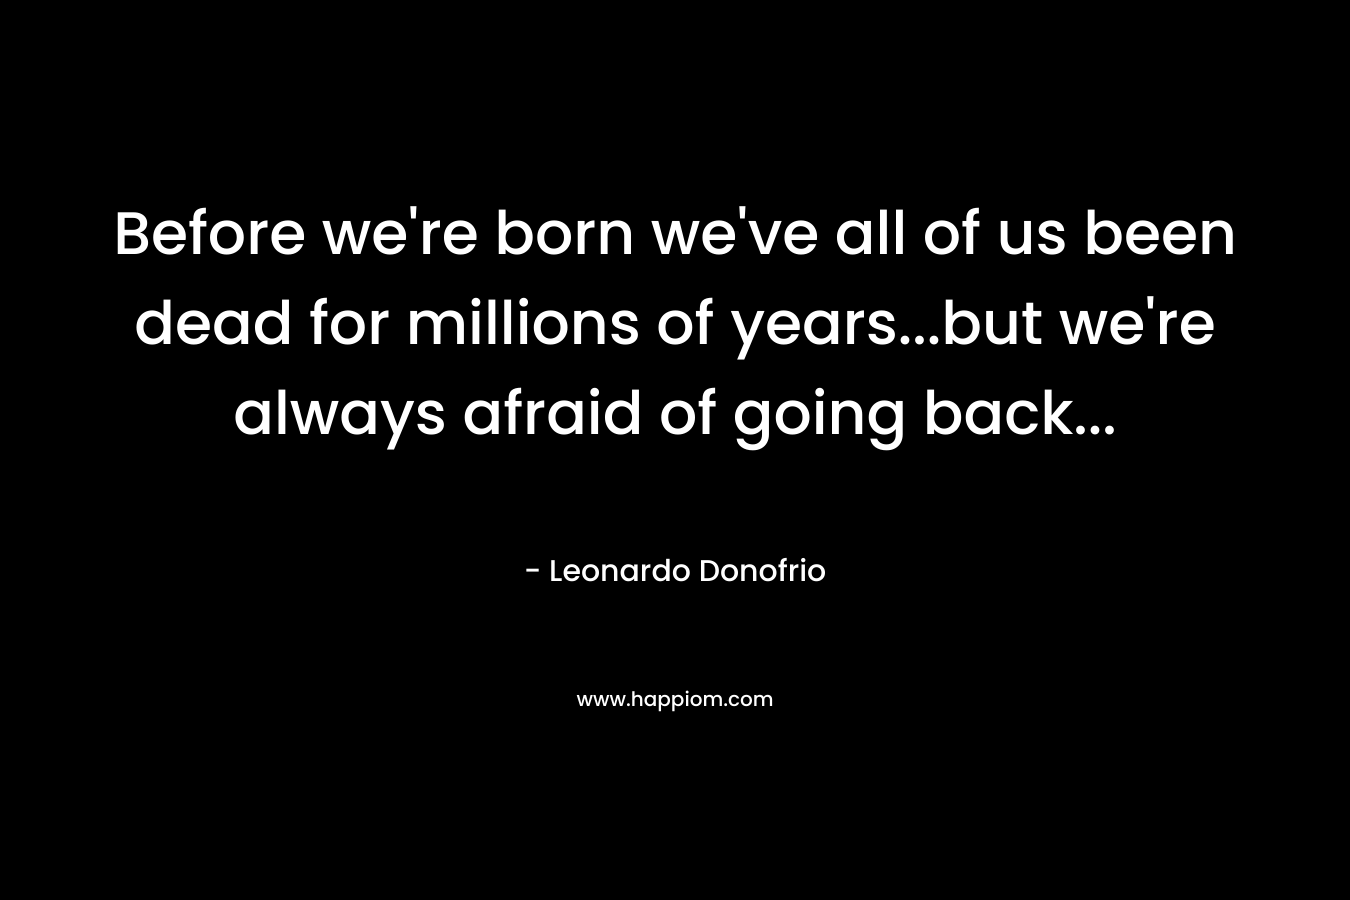 Before we're born we've all of us been dead for millions of years...but we're always afraid of going back...